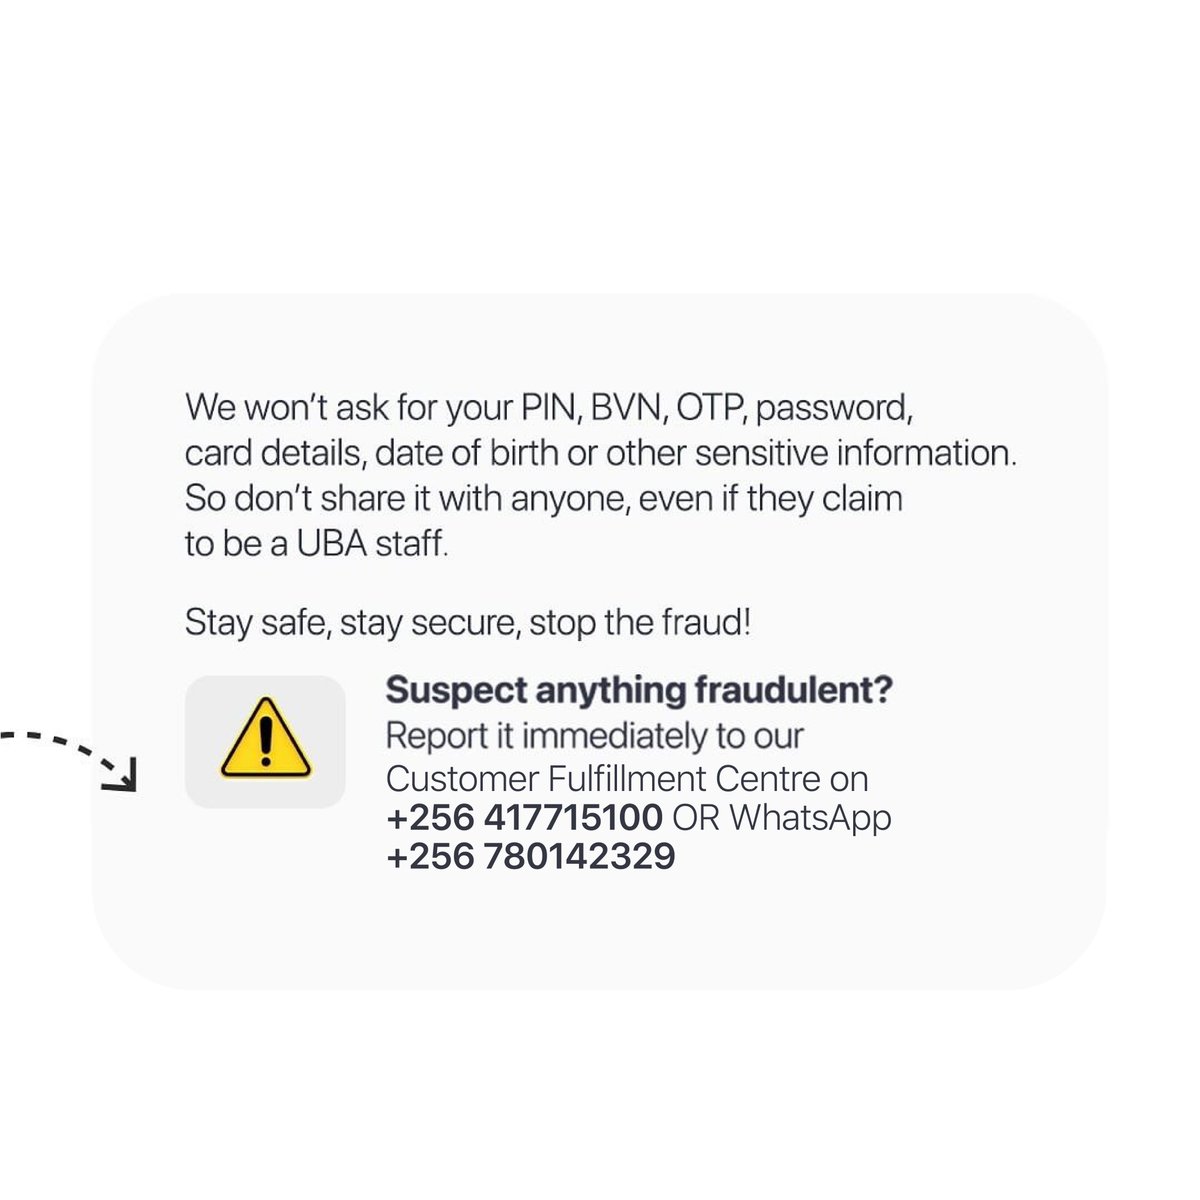 𝐘𝐨𝐮𝐫 𝐬𝐞𝐜𝐮𝐫𝐢𝐭𝐲 𝐢𝐬 𝐨𝐮𝐫 𝐩𝐫𝐢𝐨𝐫𝐢𝐭𝐲! As the festive season approaches, scammers are on the rise. UBA will NEVER ask for your PIN, BVN, OTP, password, card details, or sensitive info. Don't fall victim to fraud – stay vigilant and safeguard your personal…